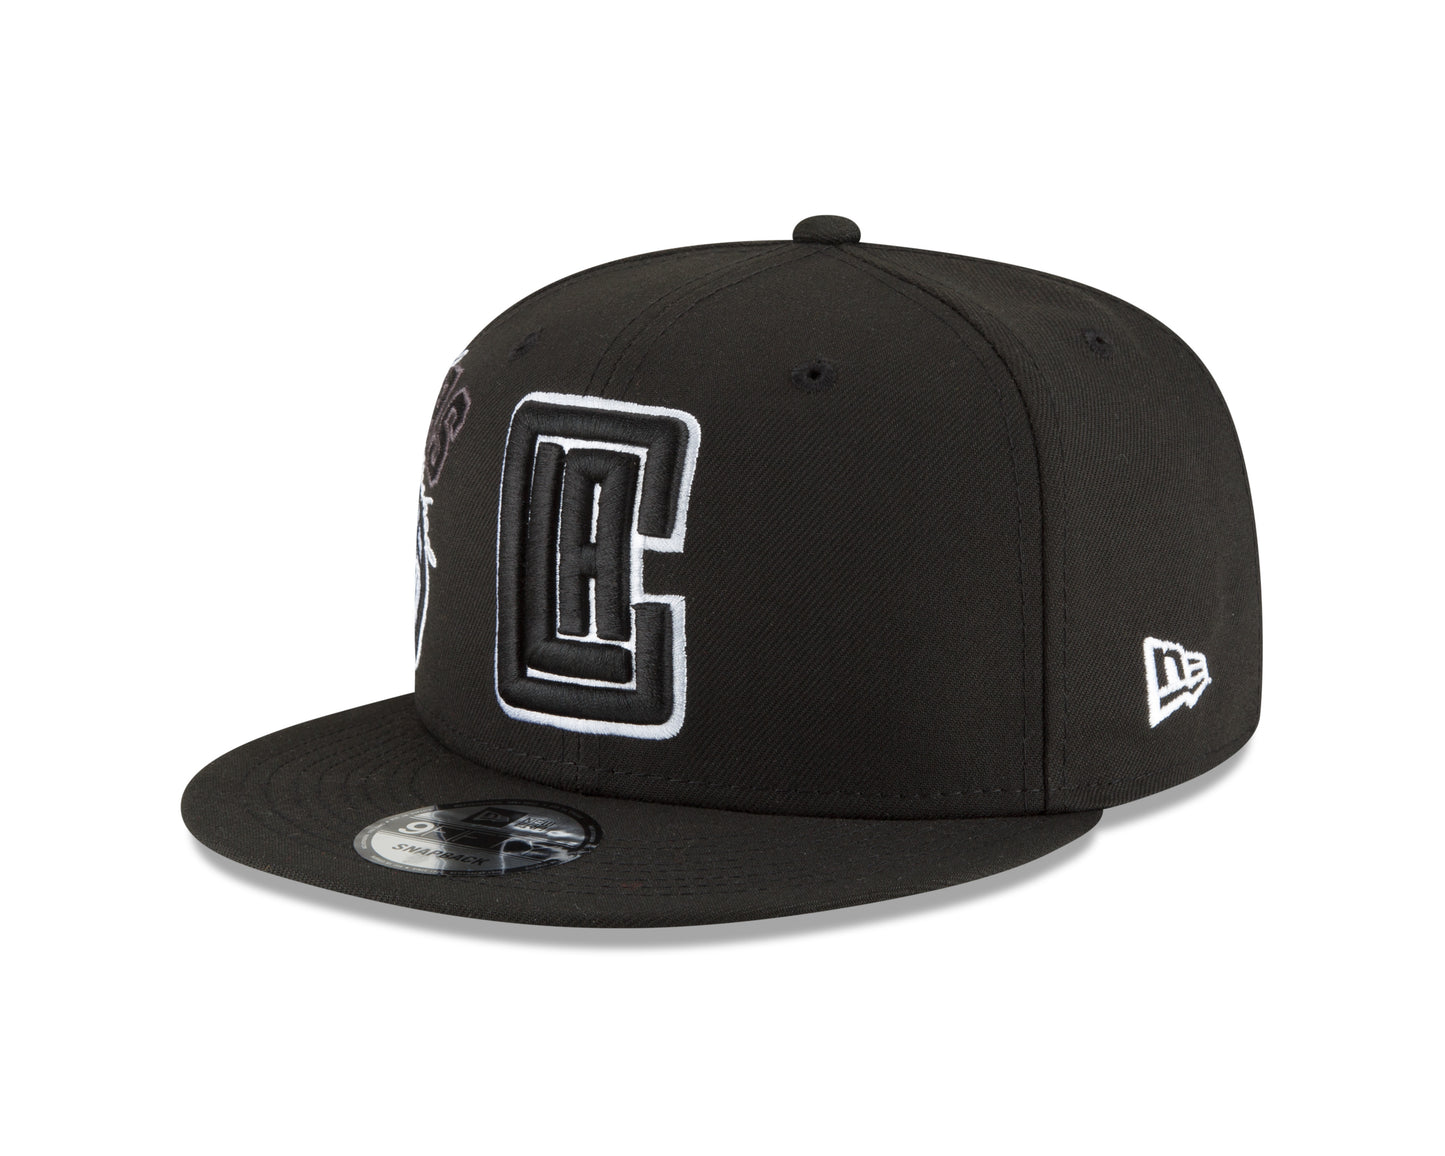 Los Angeles Clippers Black & White Back Half Series 9FIFTY Snap Back Hat